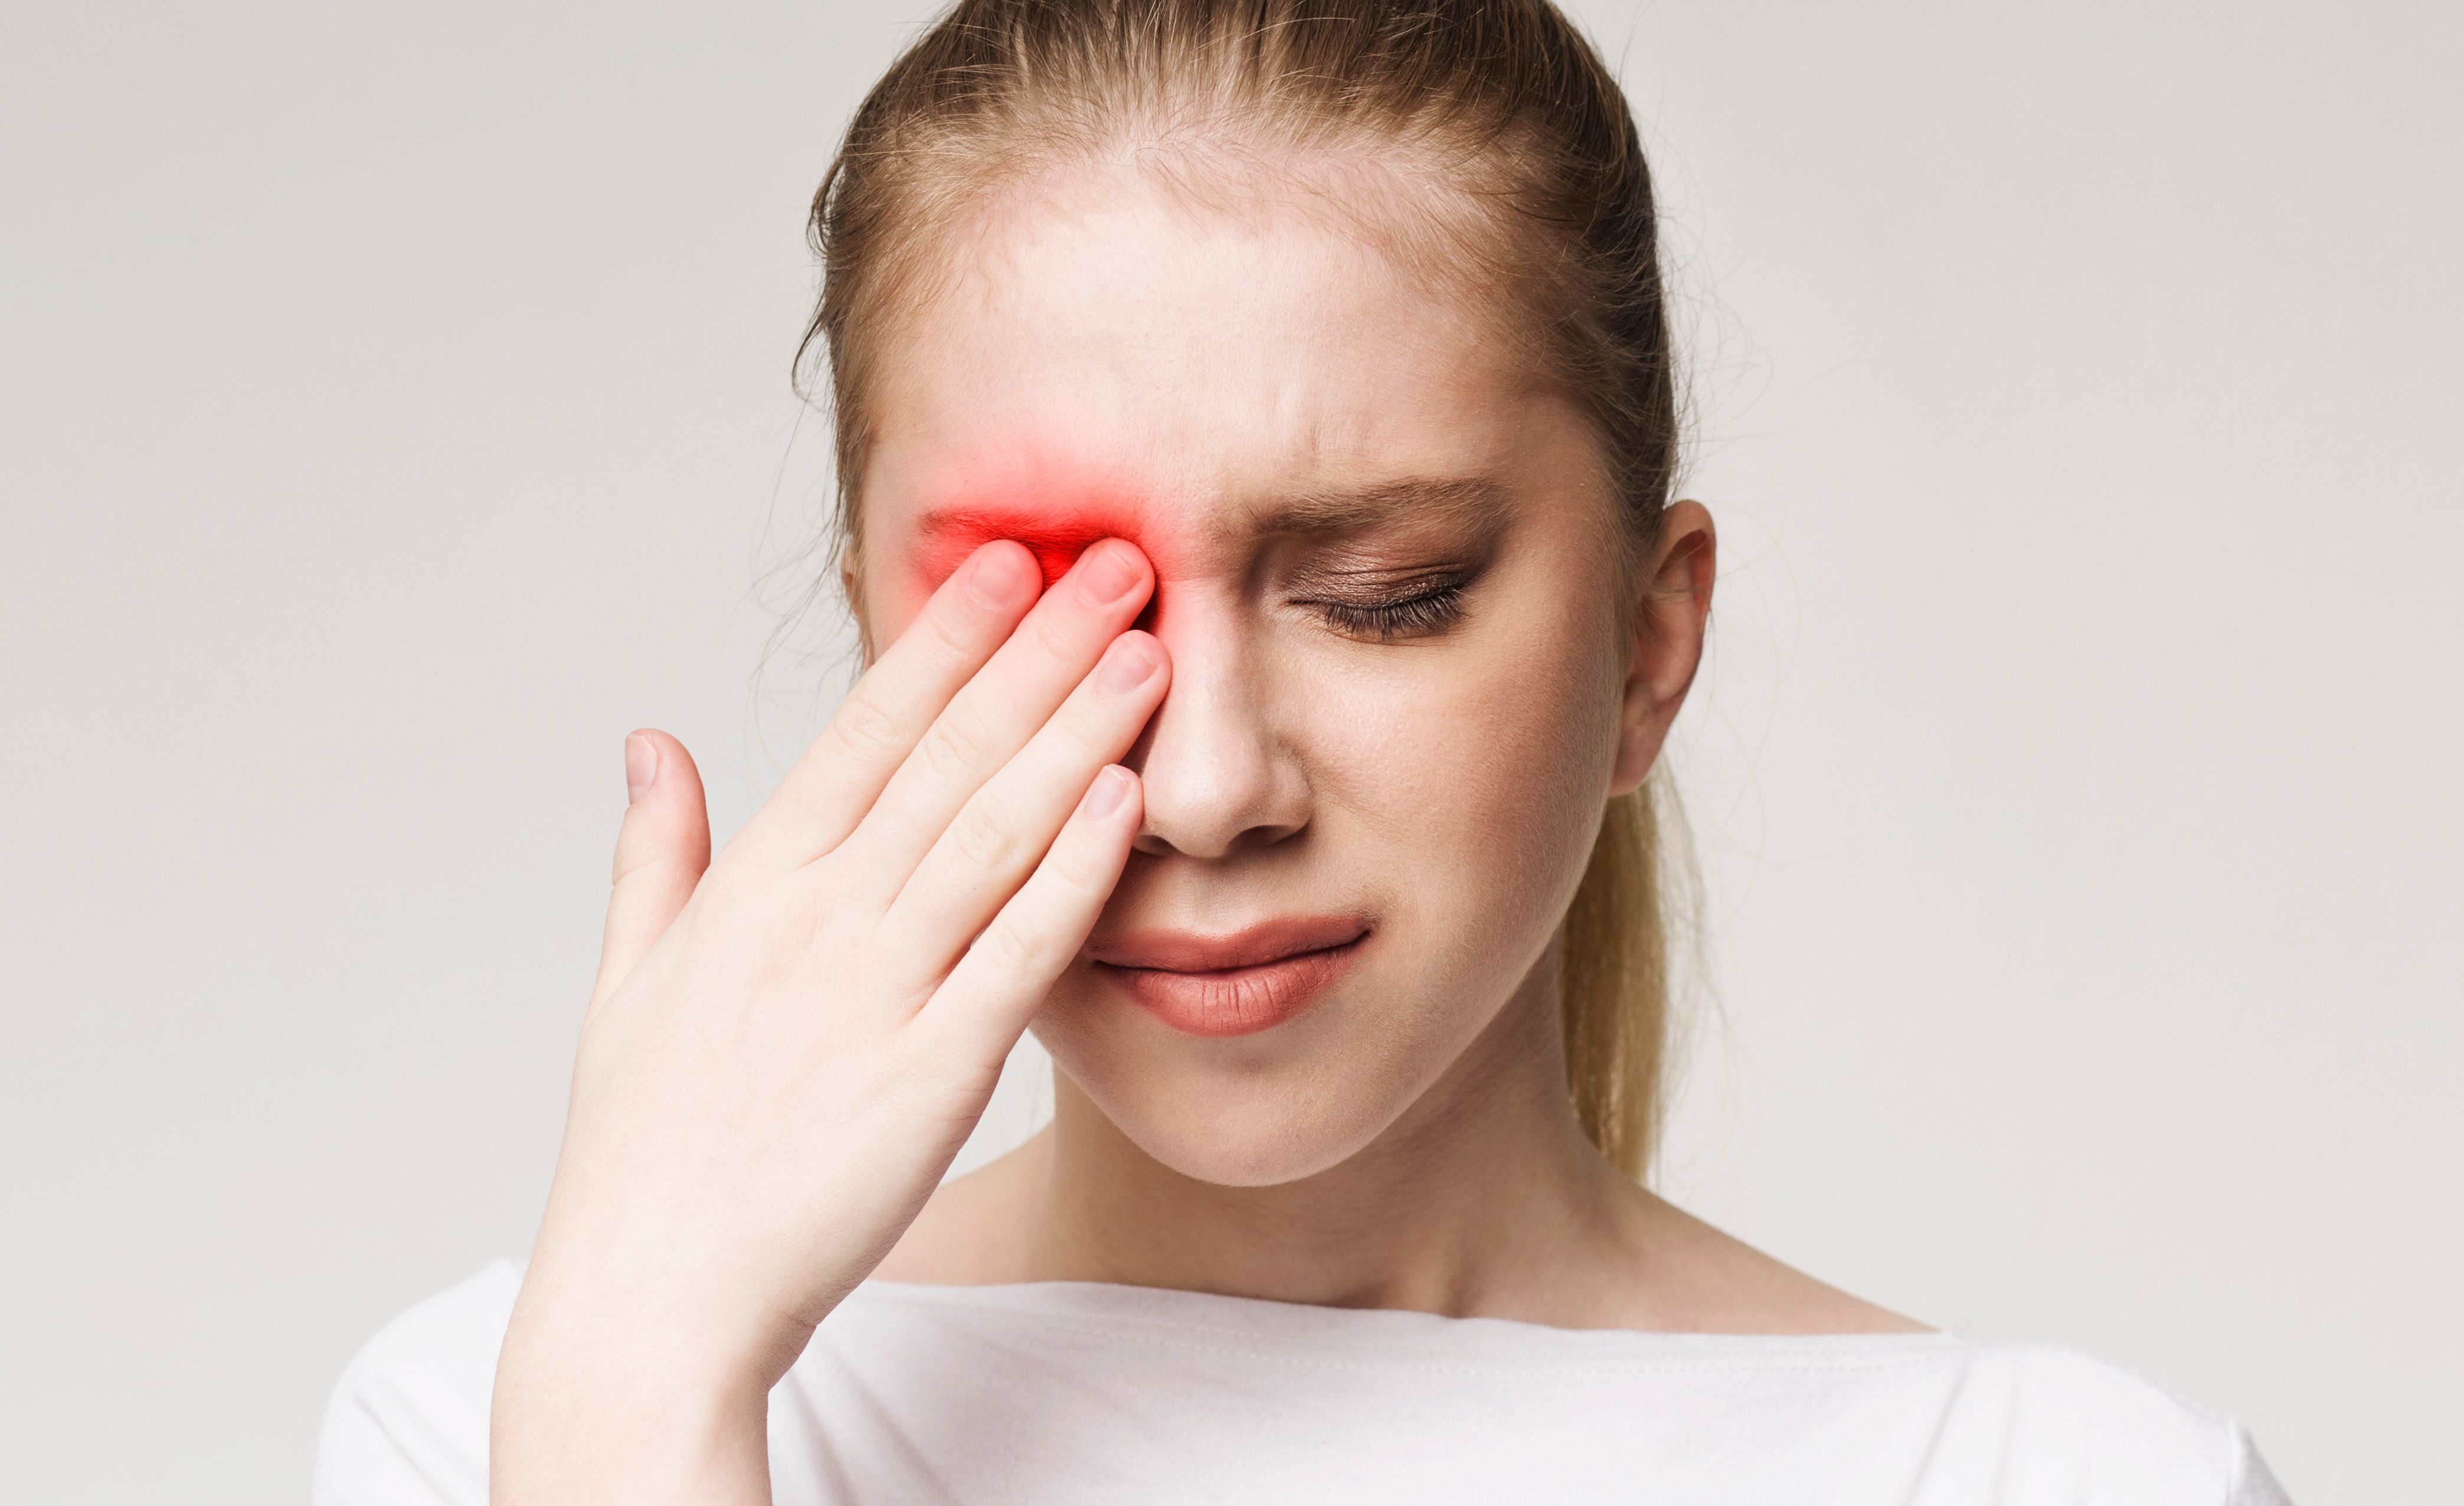 How to Prevent Eye Injuries